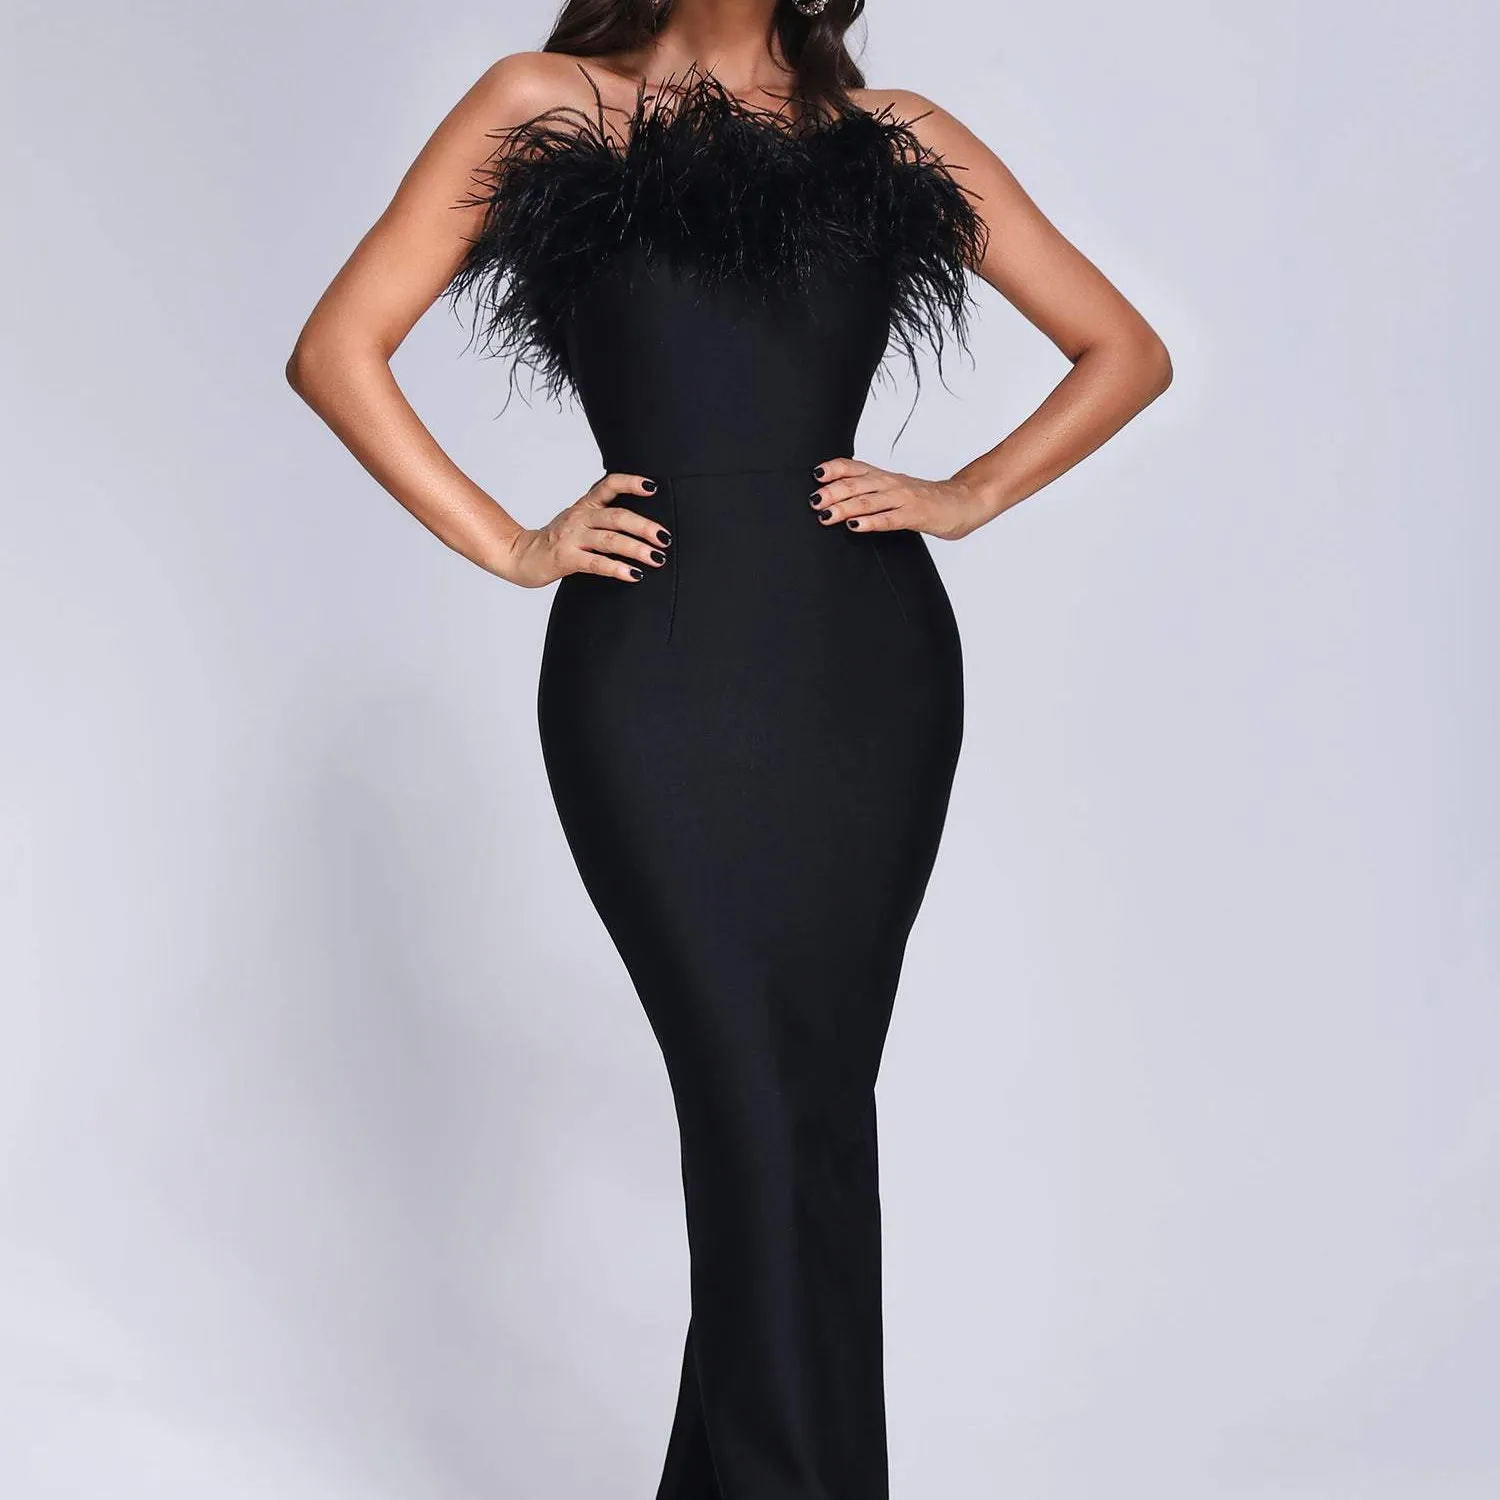 Women Off Shoulder Bandage Bodycon Feather Dress Black Evening Formal Maxi Dress With Feathers